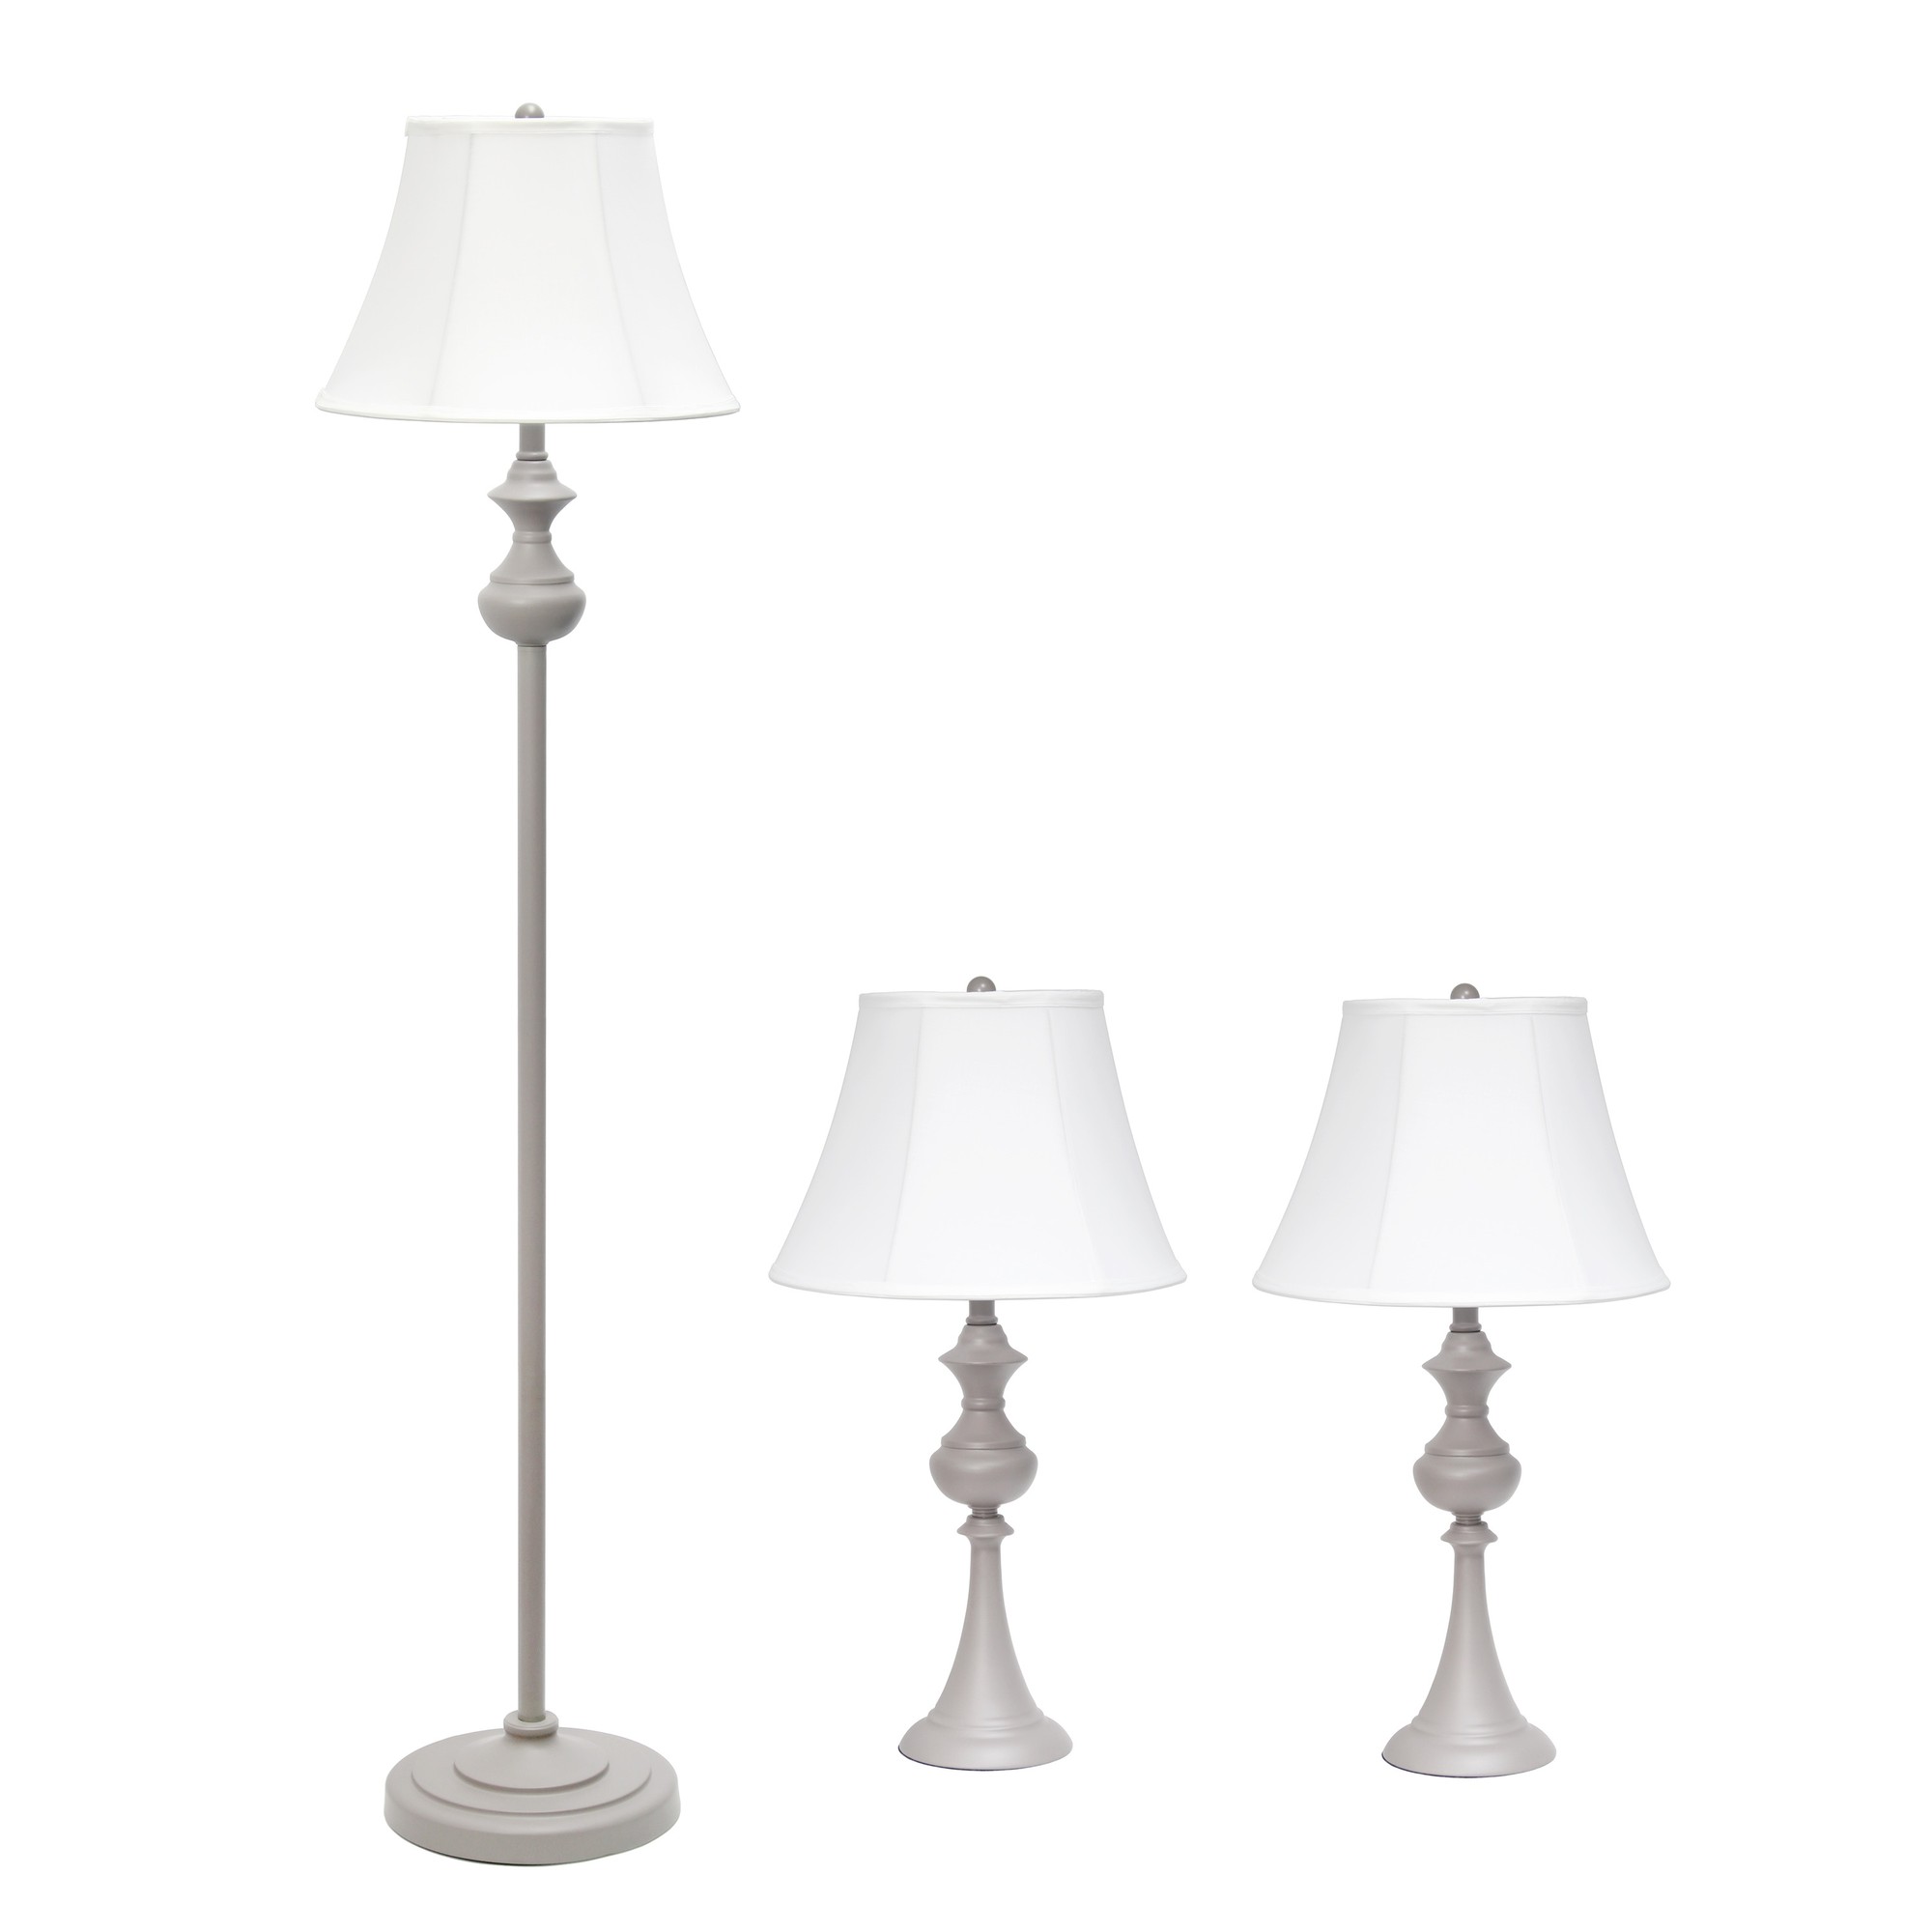 Lalia Home 3 Piece Metal Lamp Set (2 Table Lamps, 1 Floor Lamp) White Empire Fabric Shades and Gray Finish